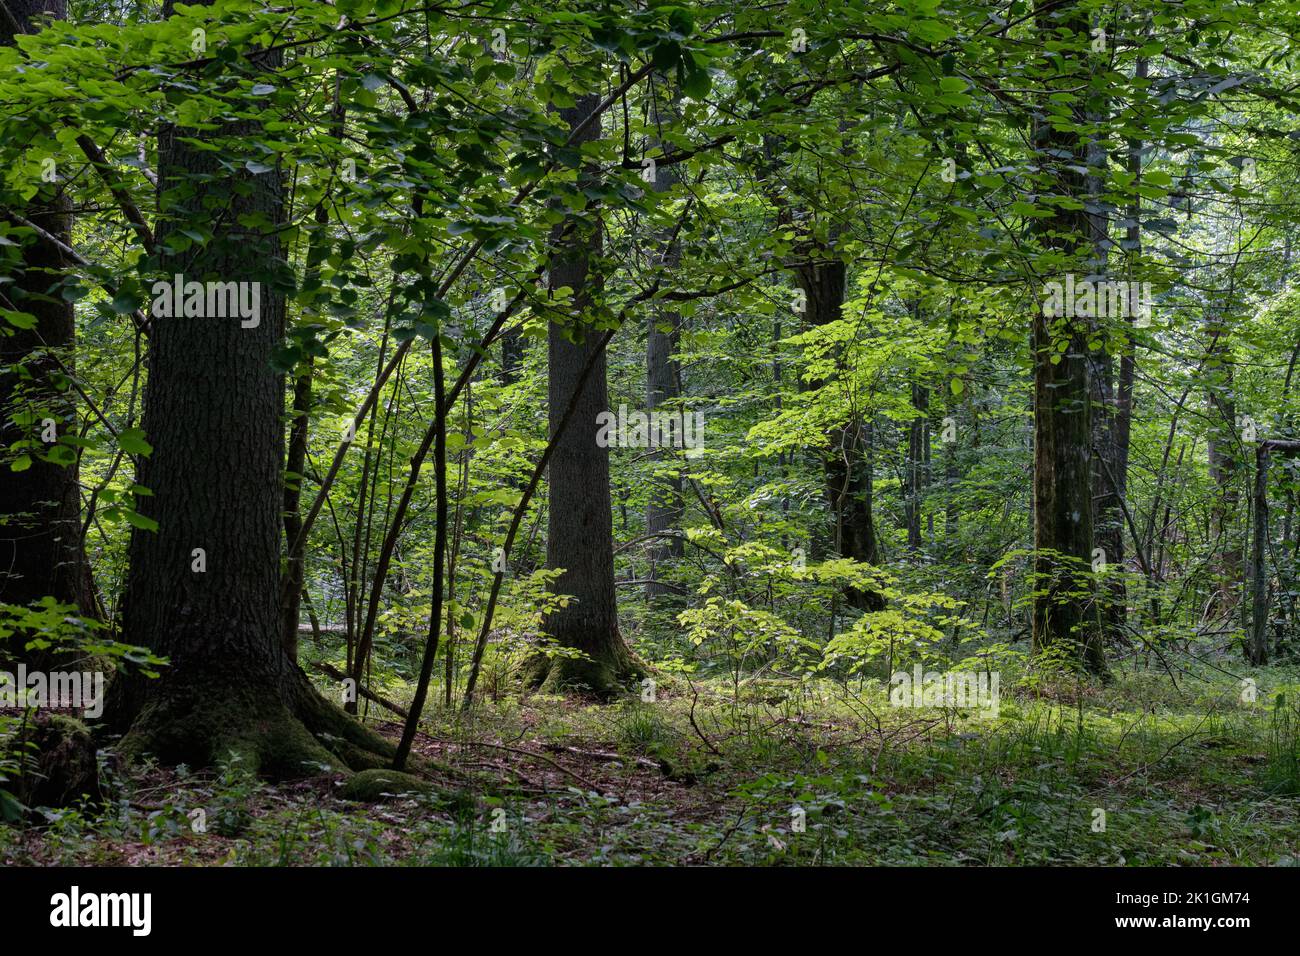 Shady deciduous tree stand with broken oak tree in background, Bialowieza Forest, Poland, Europe Stock Photo